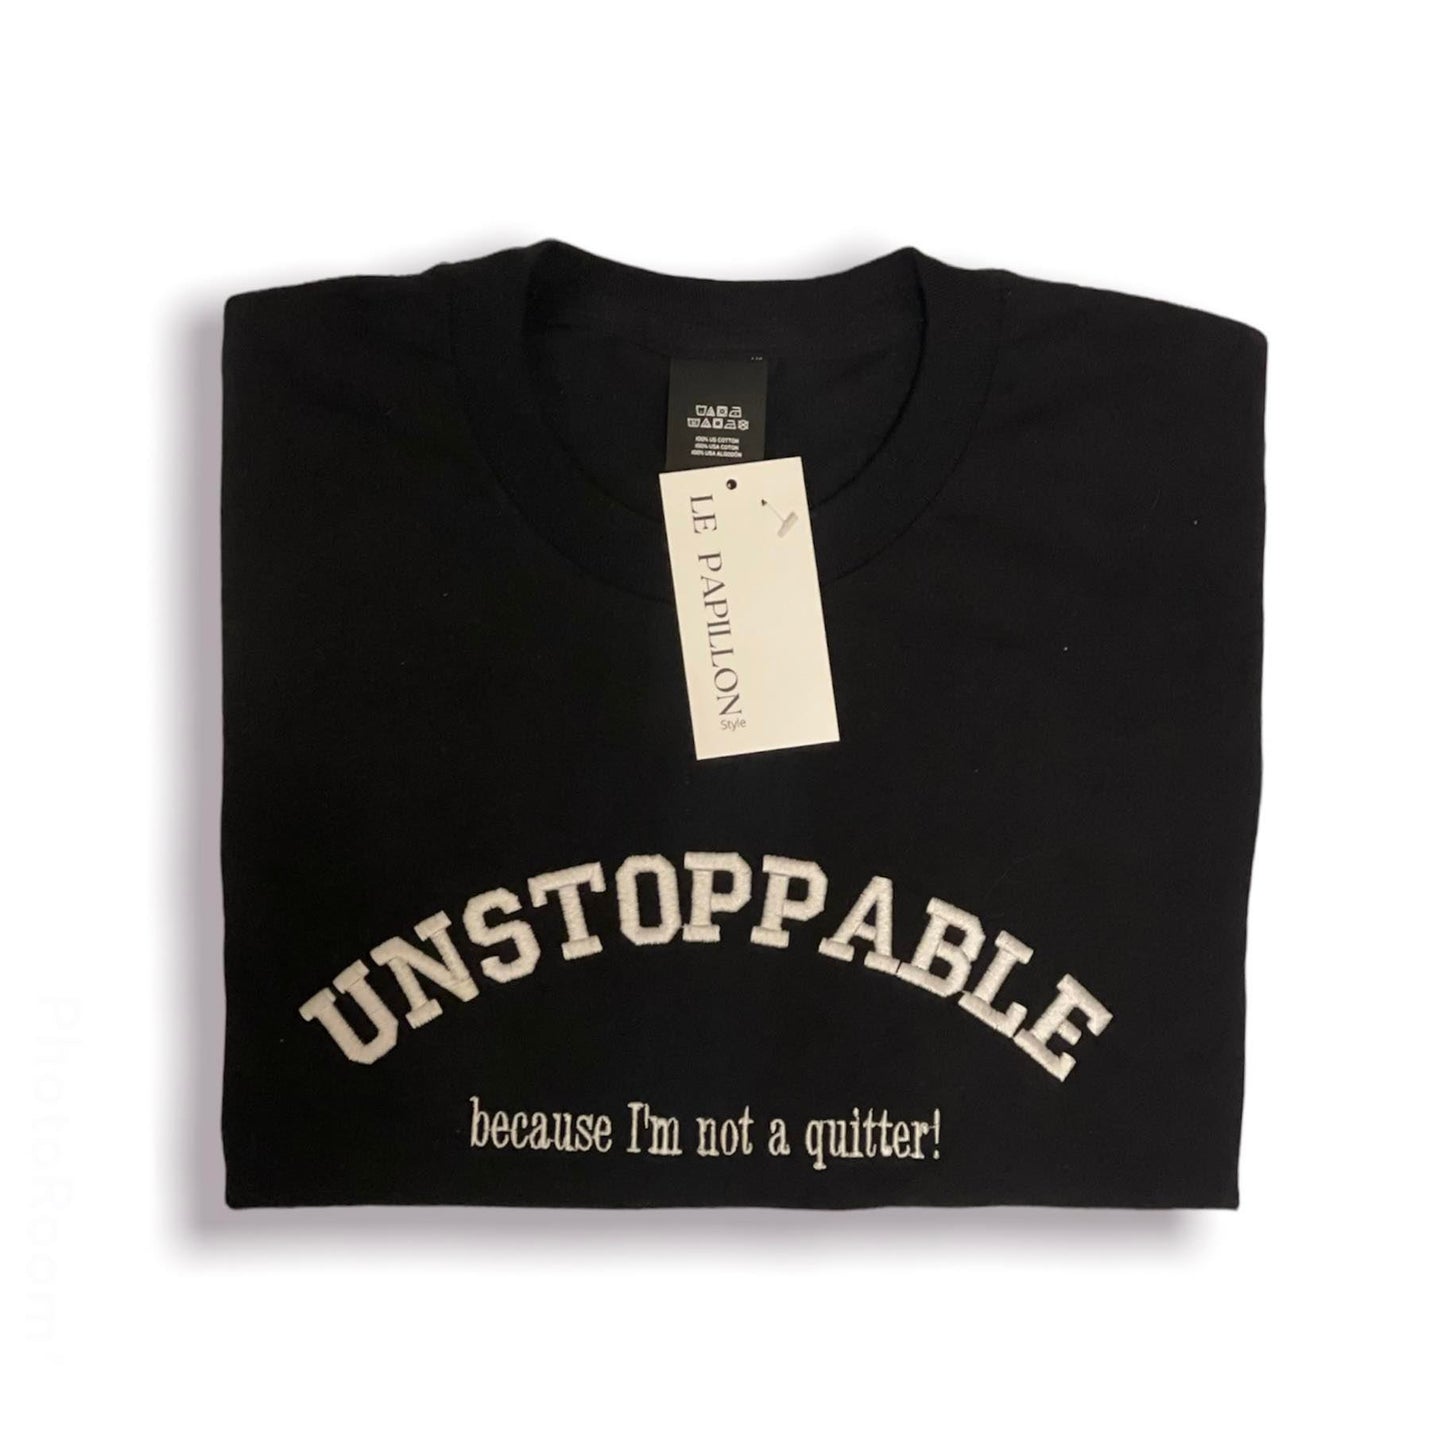 Unstoppable, because I'm not a quitter Tee